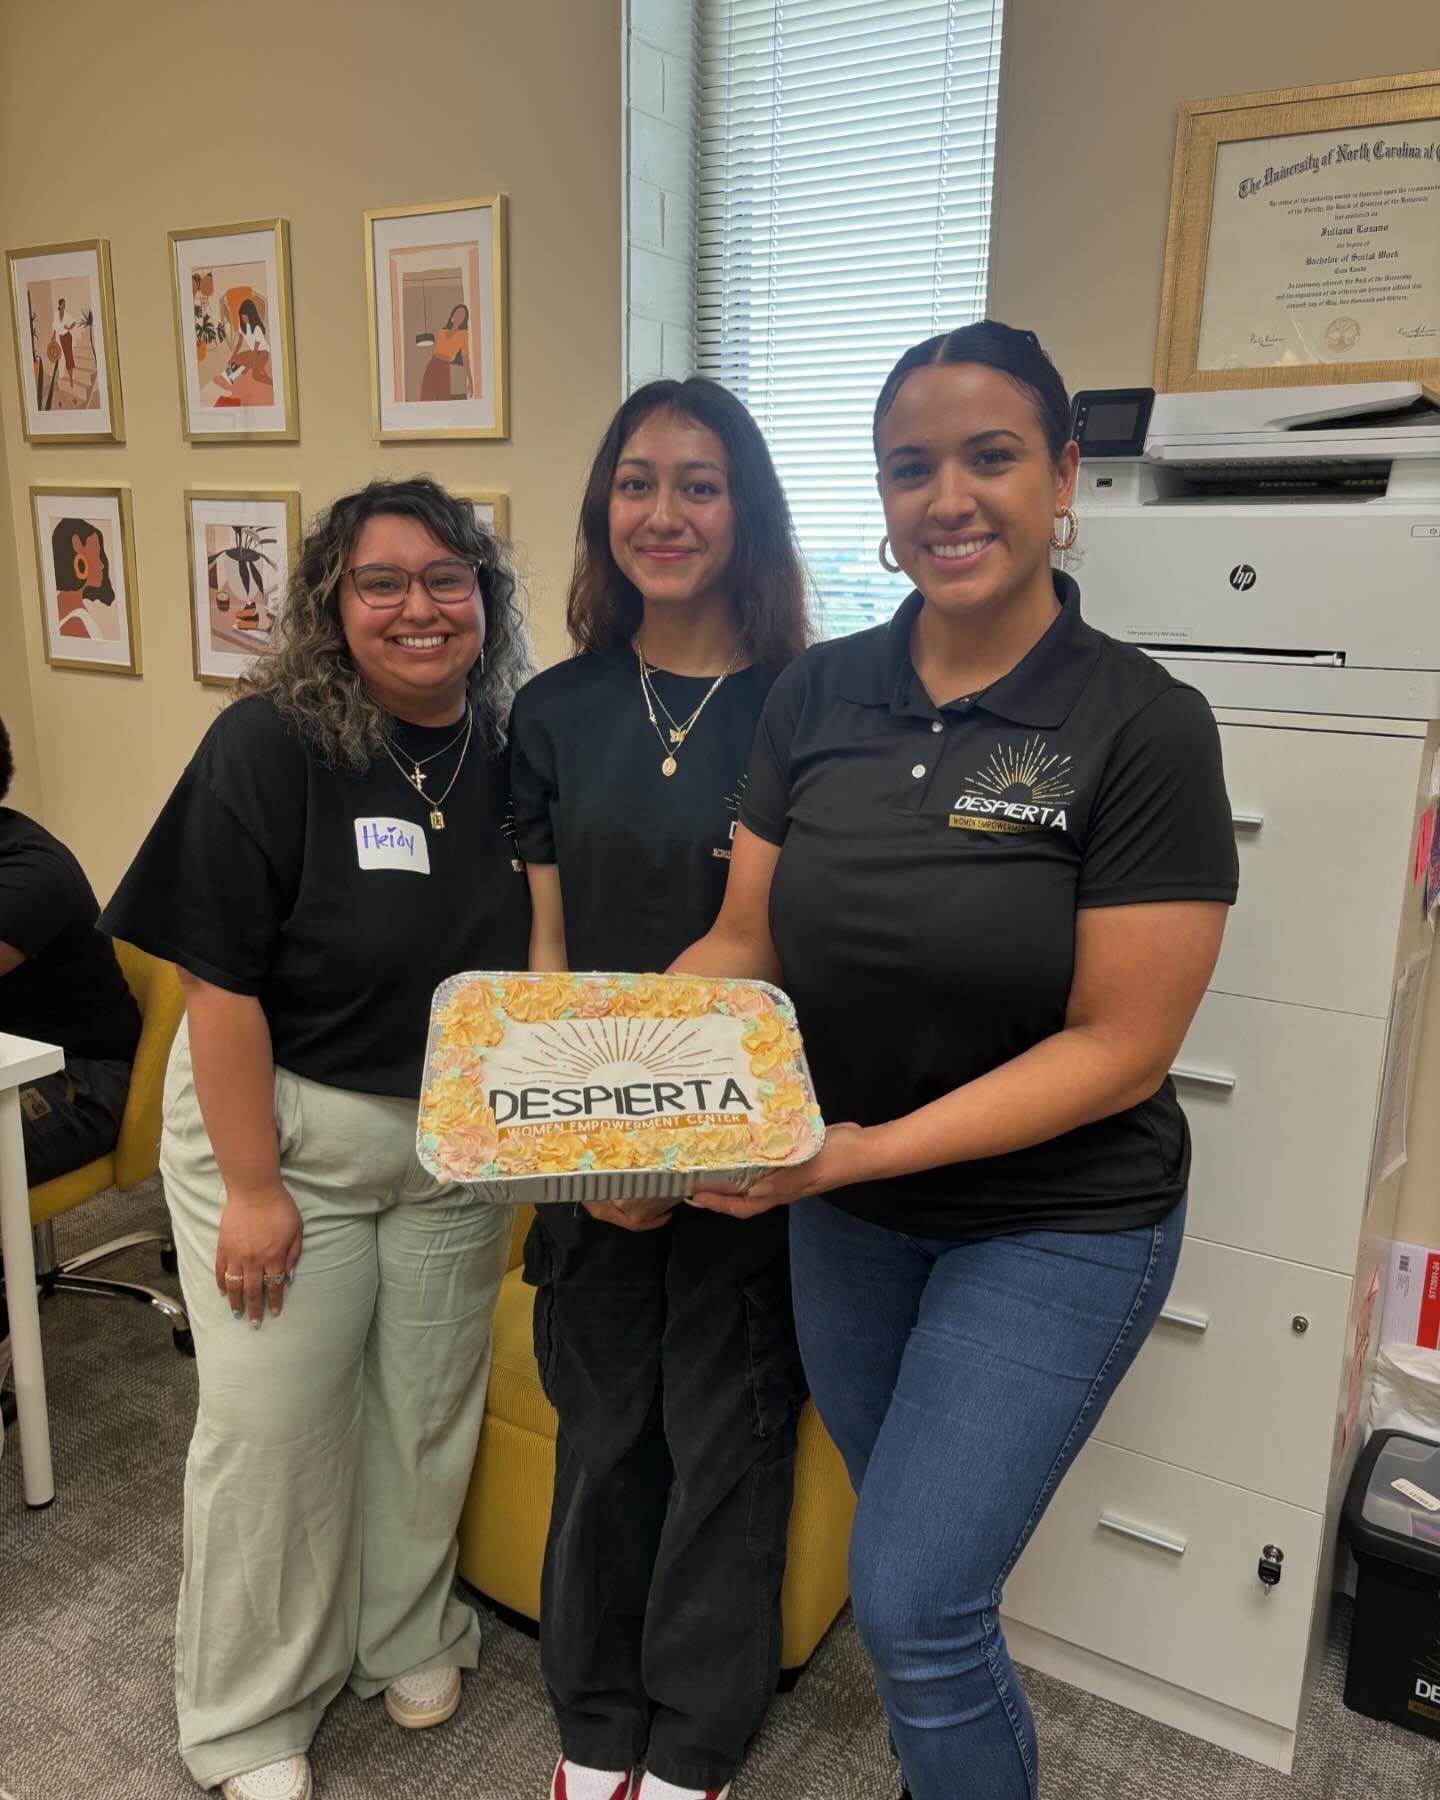 Congratulations to Despierta and my friend, Juliana Lozano, on their new office space on Park Road in Charlotte. This small but mighty organization is helping newly arrived immigrant women build community and connect with resources, and they&rsquo;re